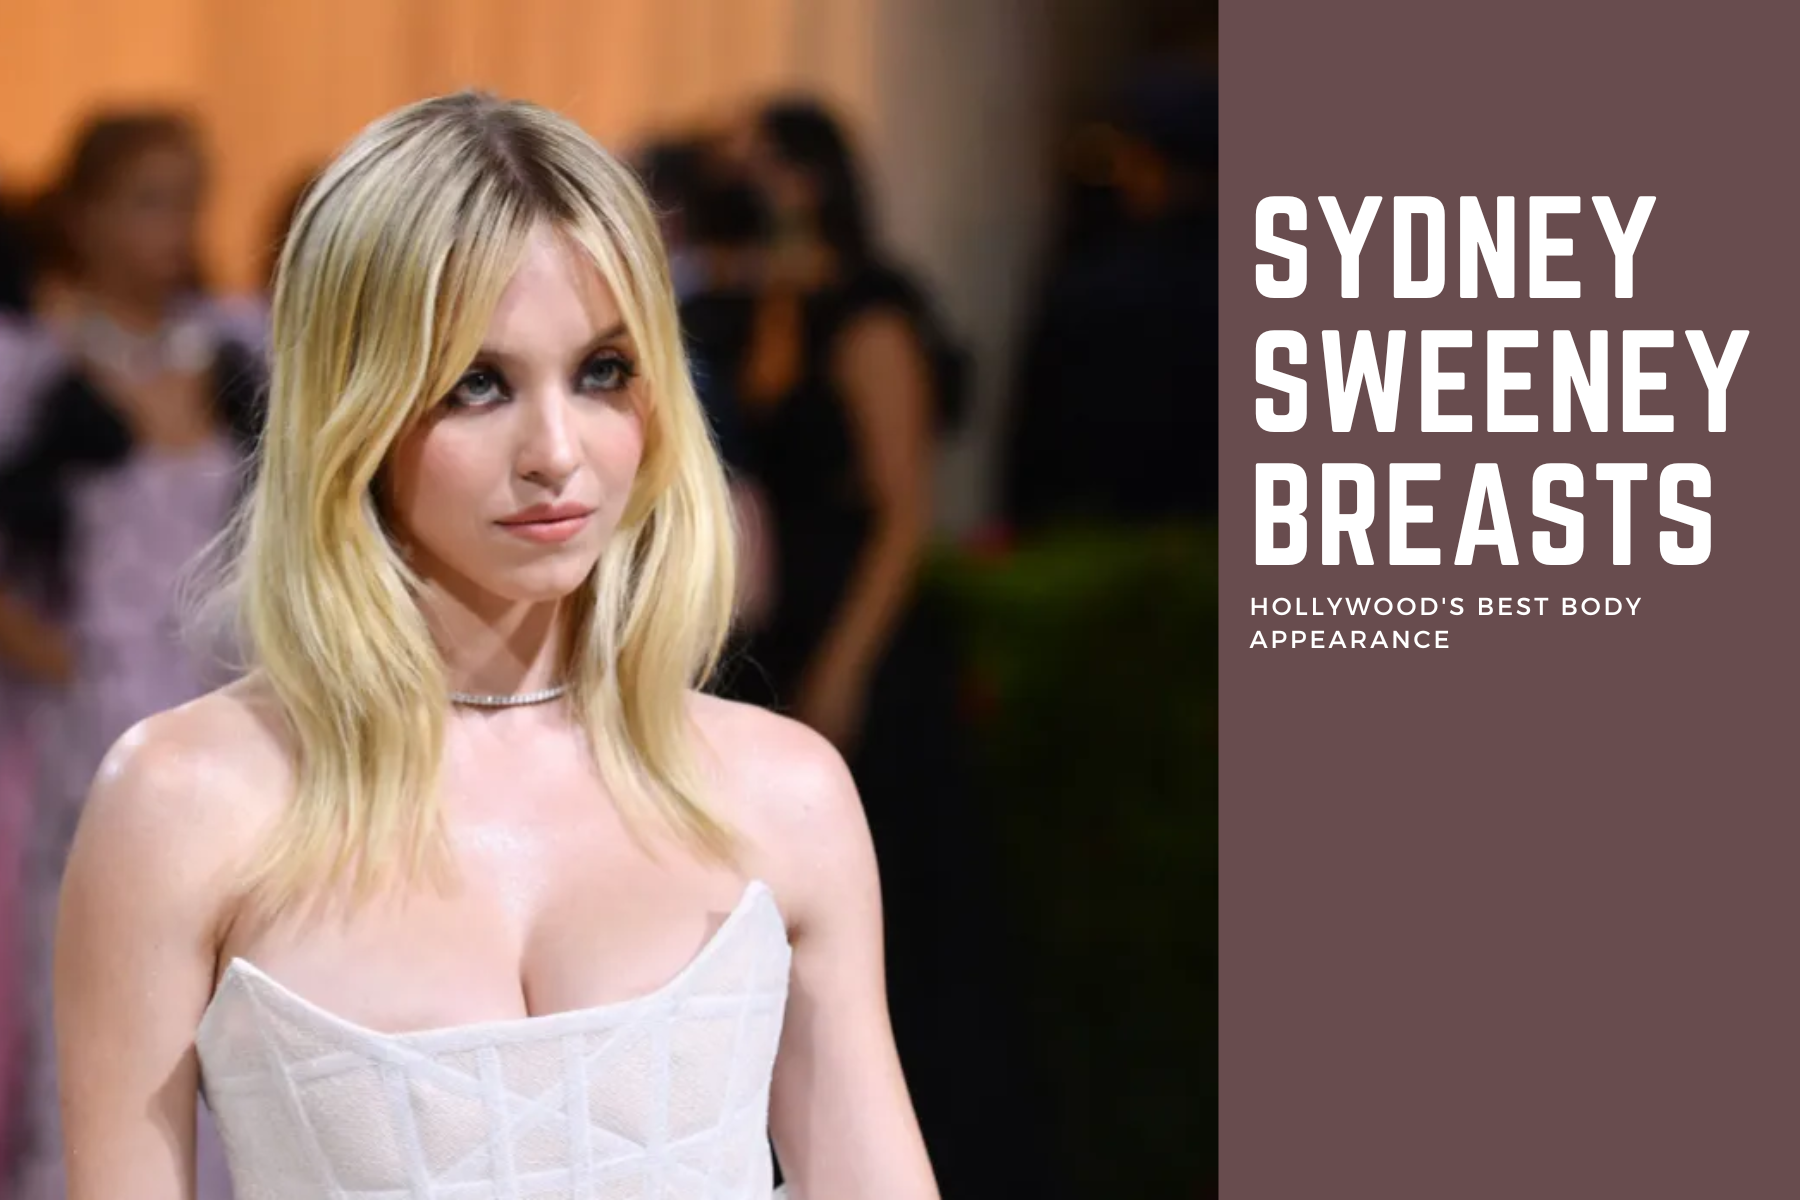 Sydney Sweeney Breasts - Hollywood's Best Body Appearance